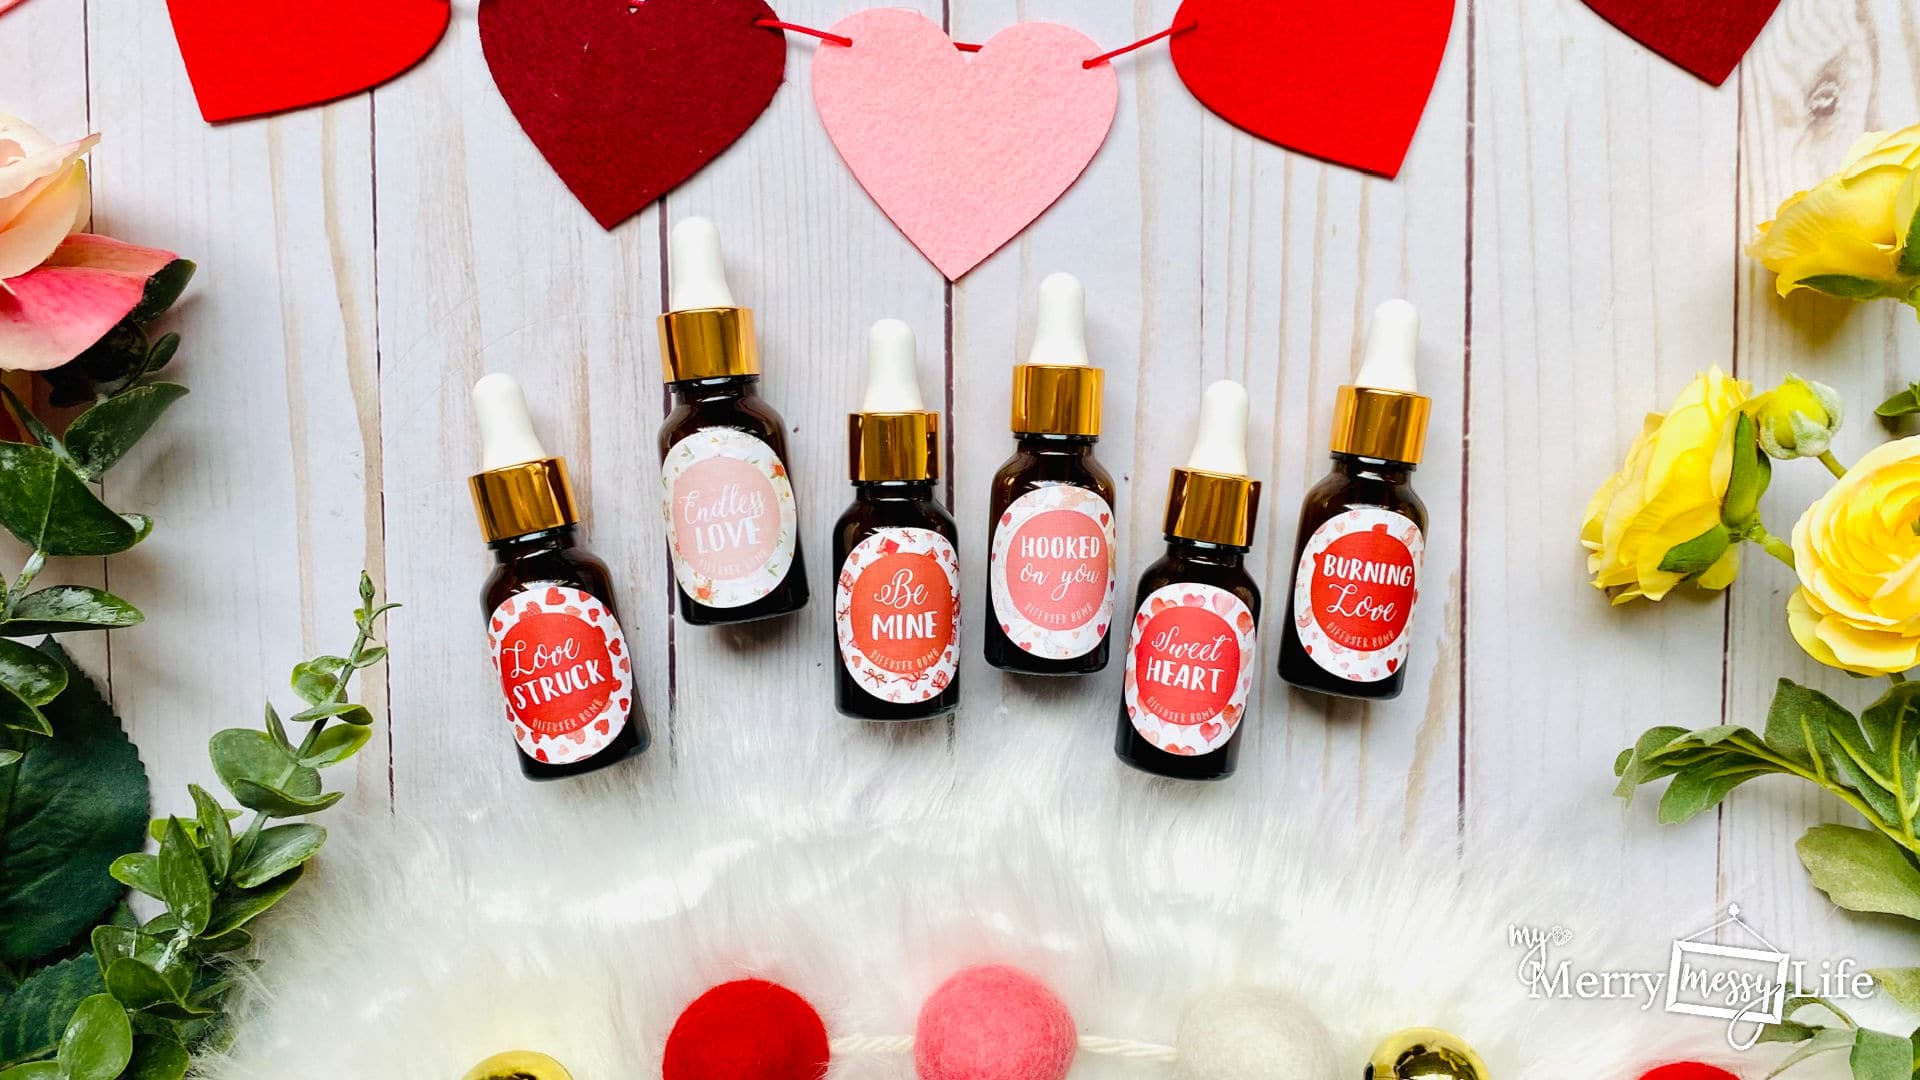 Valentine's Day Diffuser Bomb Recipes using pure essential oils like Ylang Ylang, lavender, Geranium, Sage, Bergamot and more!